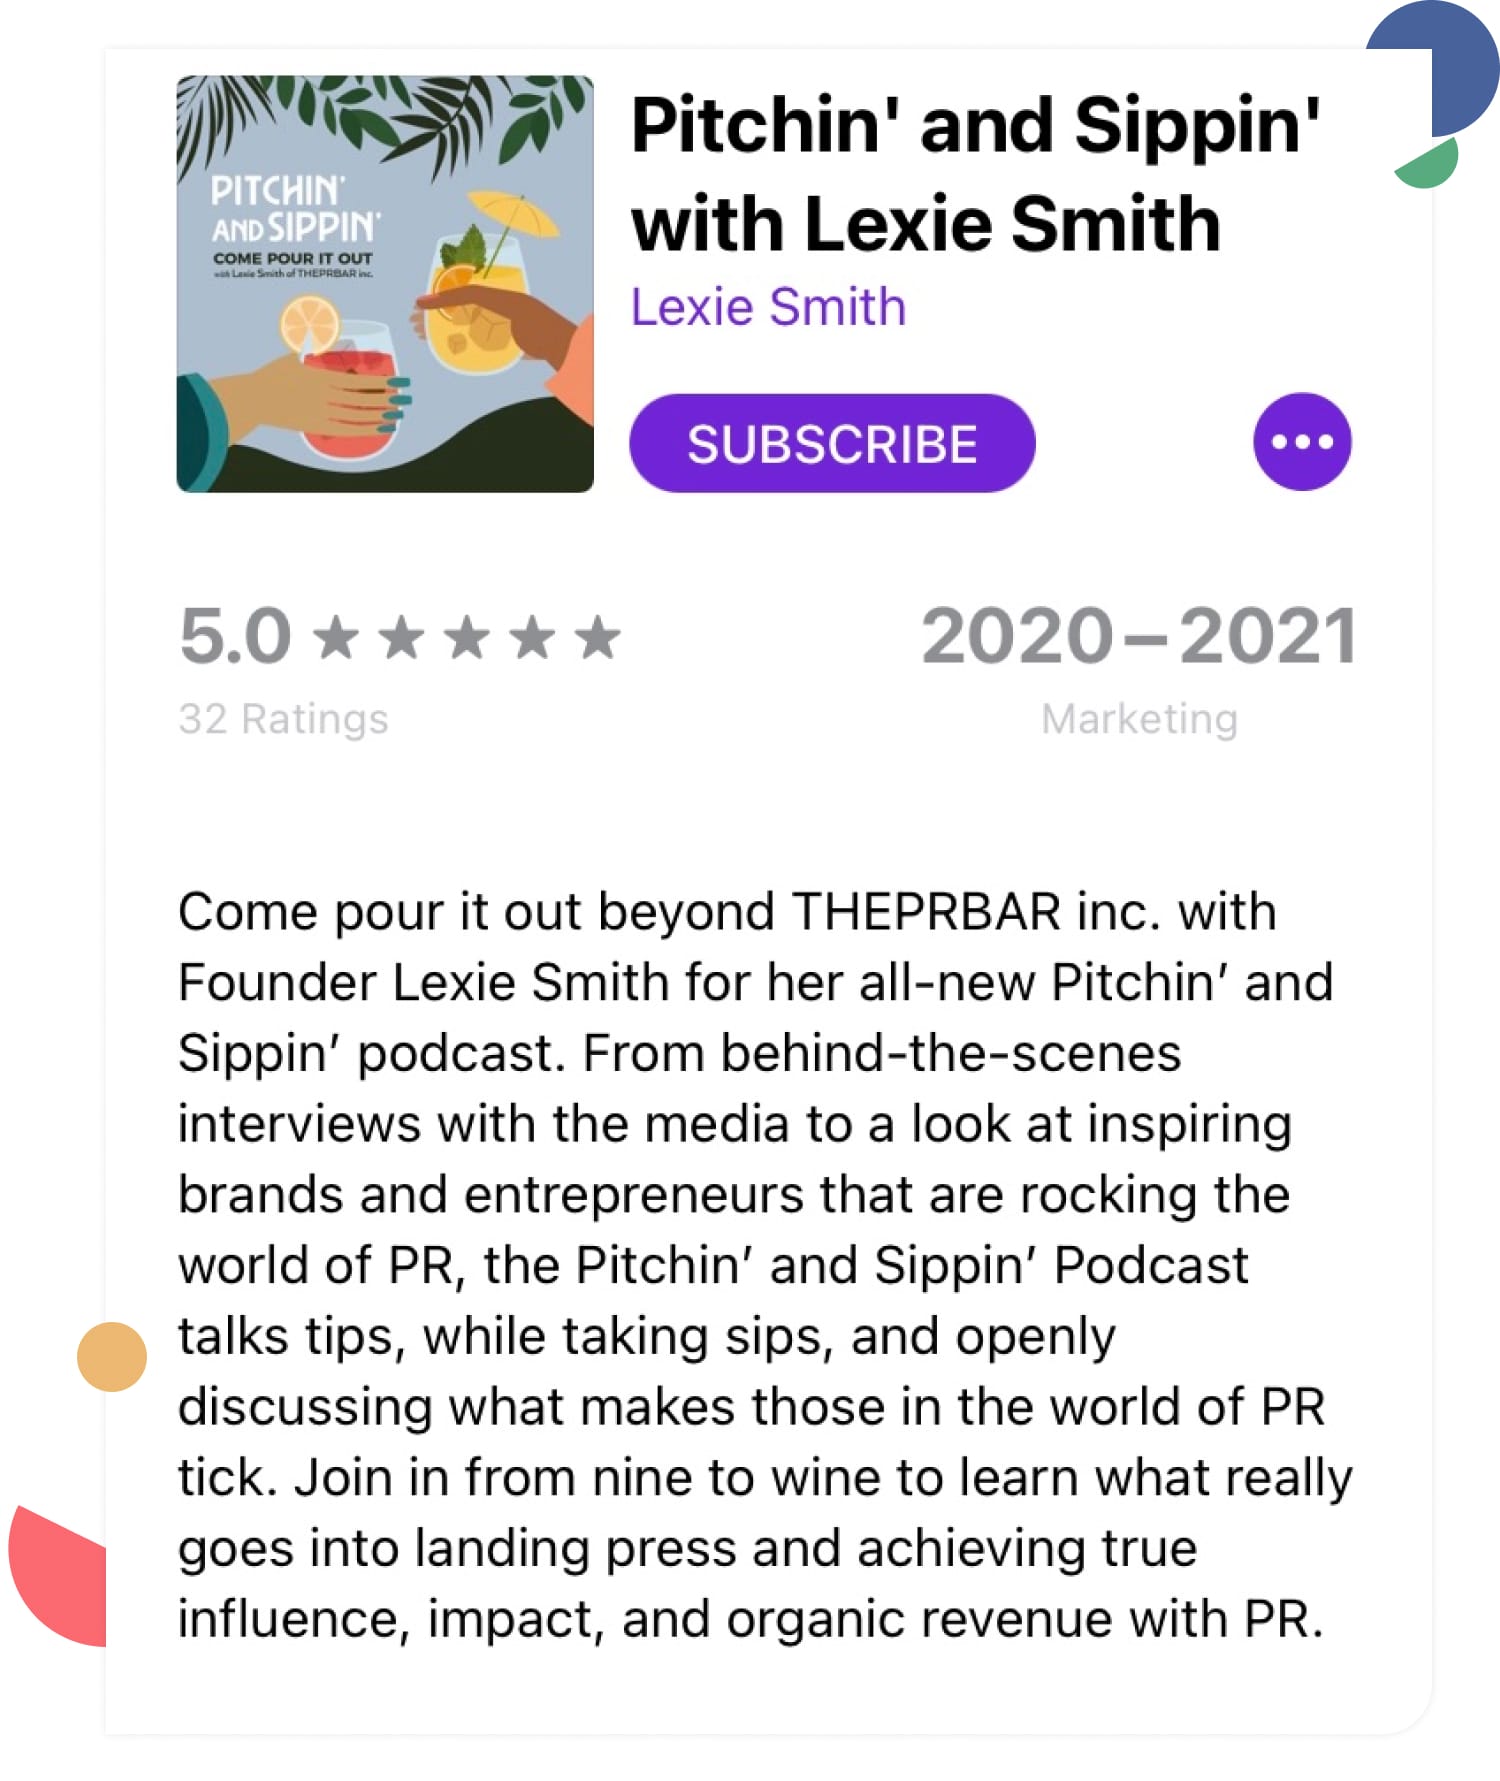 Pitchin’ and Sippin’ podcast